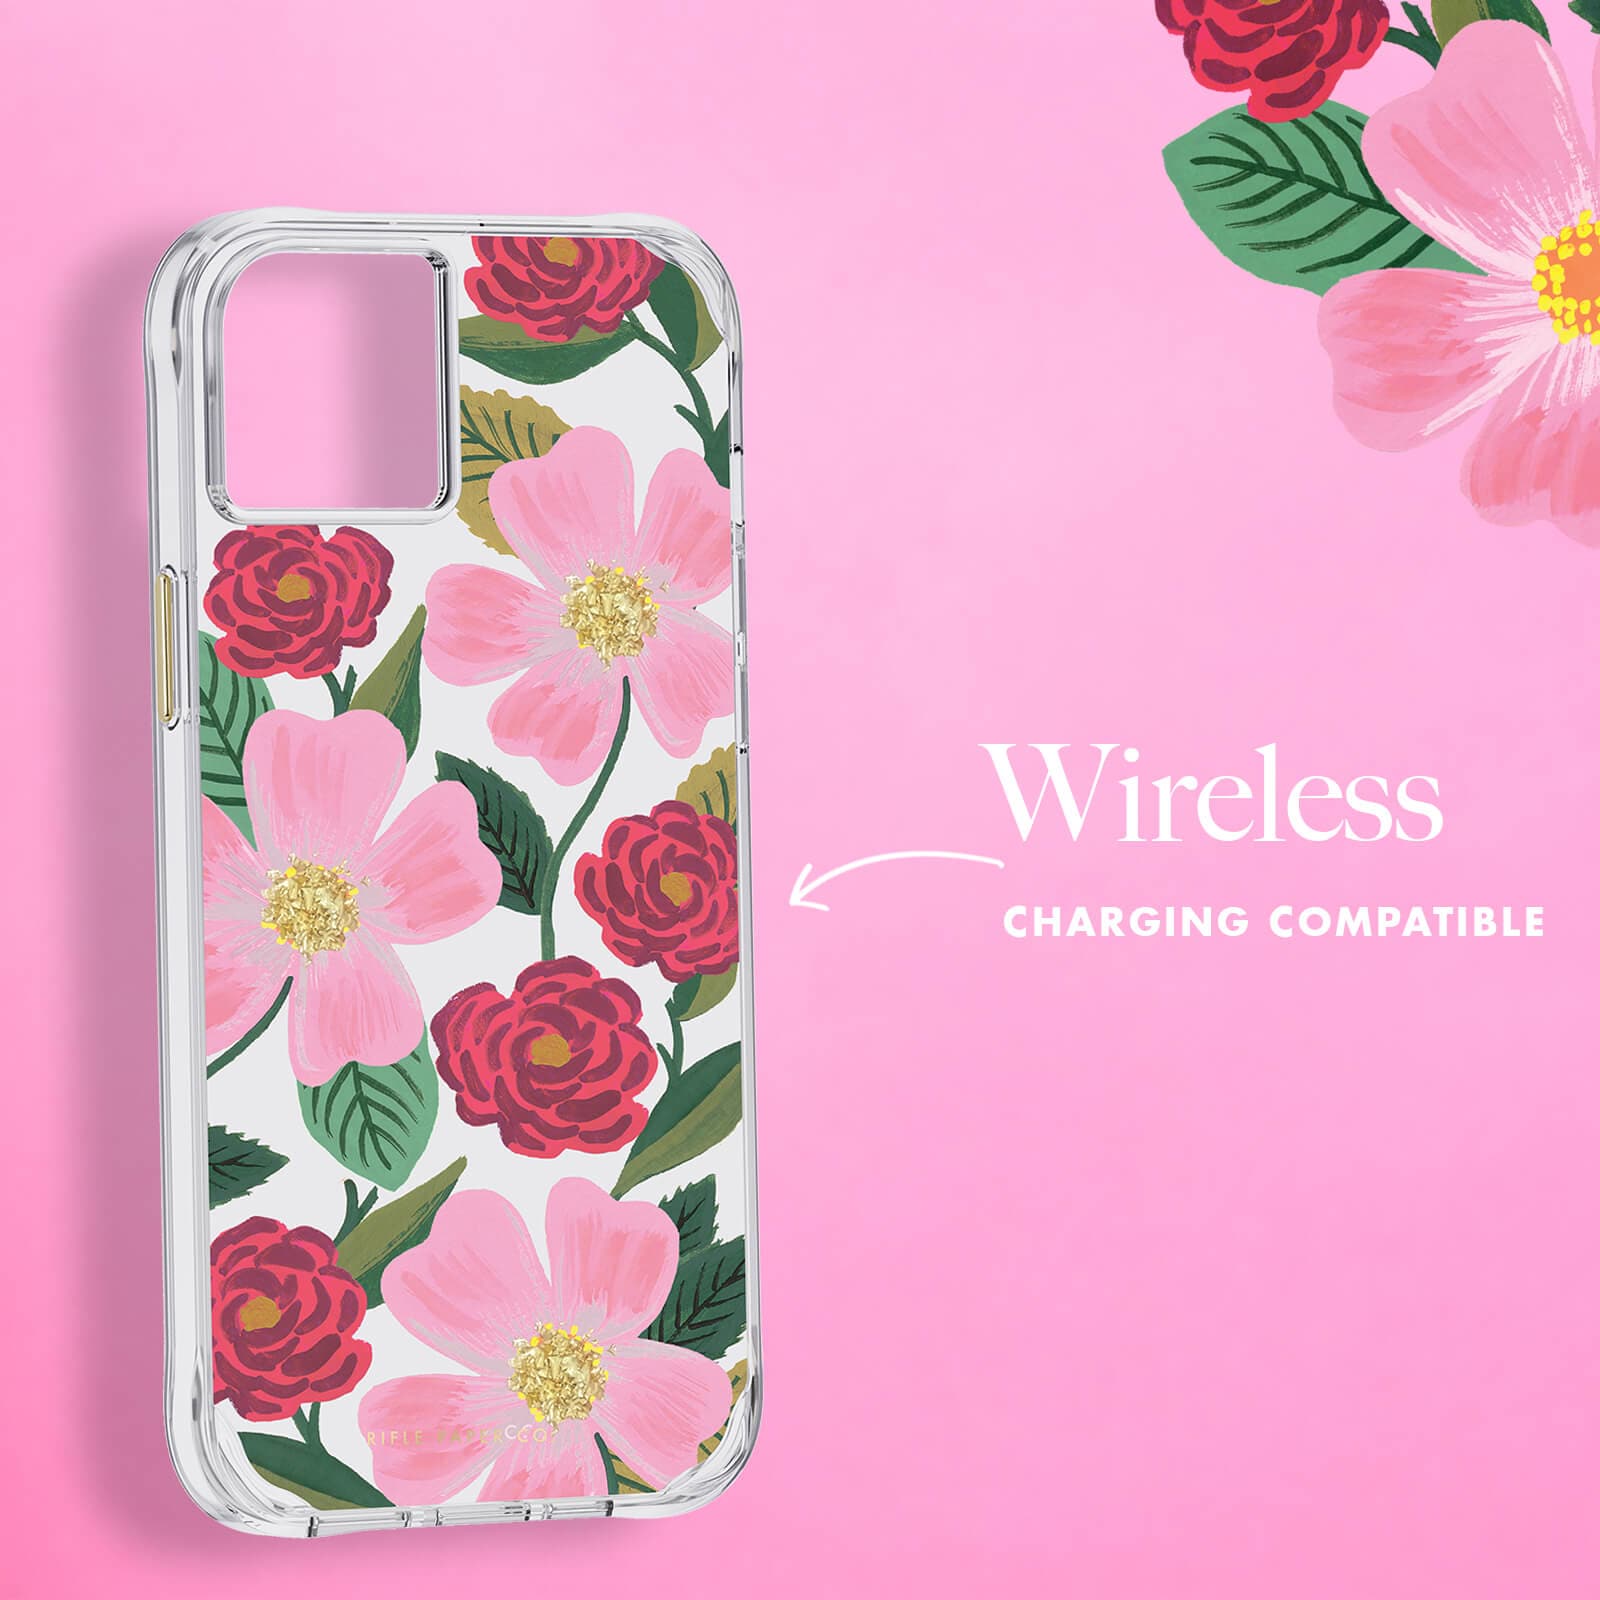 Wireless charging compatible. color::Rose Garden